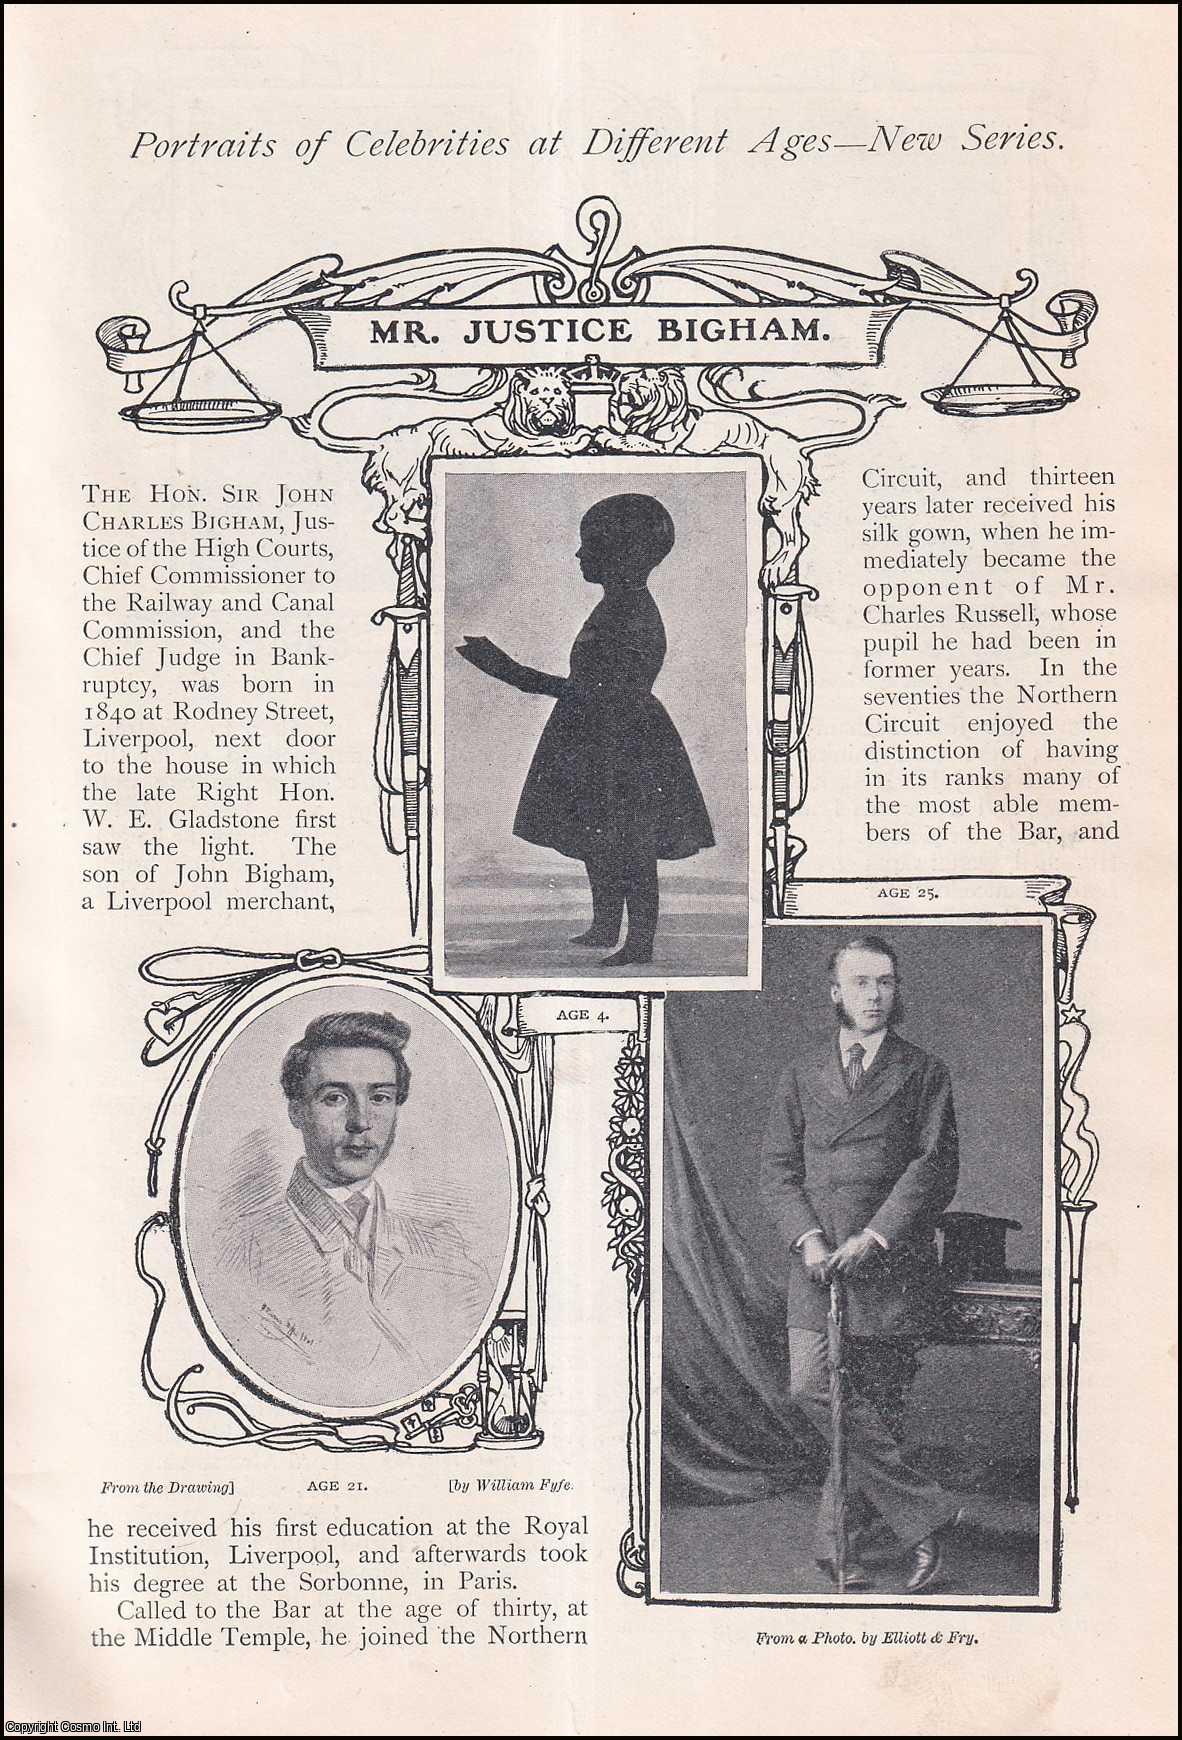 --- - The Hon. Sir John Charles Bigham. Portraits of Celebrities at Different Ages. A rare original article from The Strand Magazine, 1906.